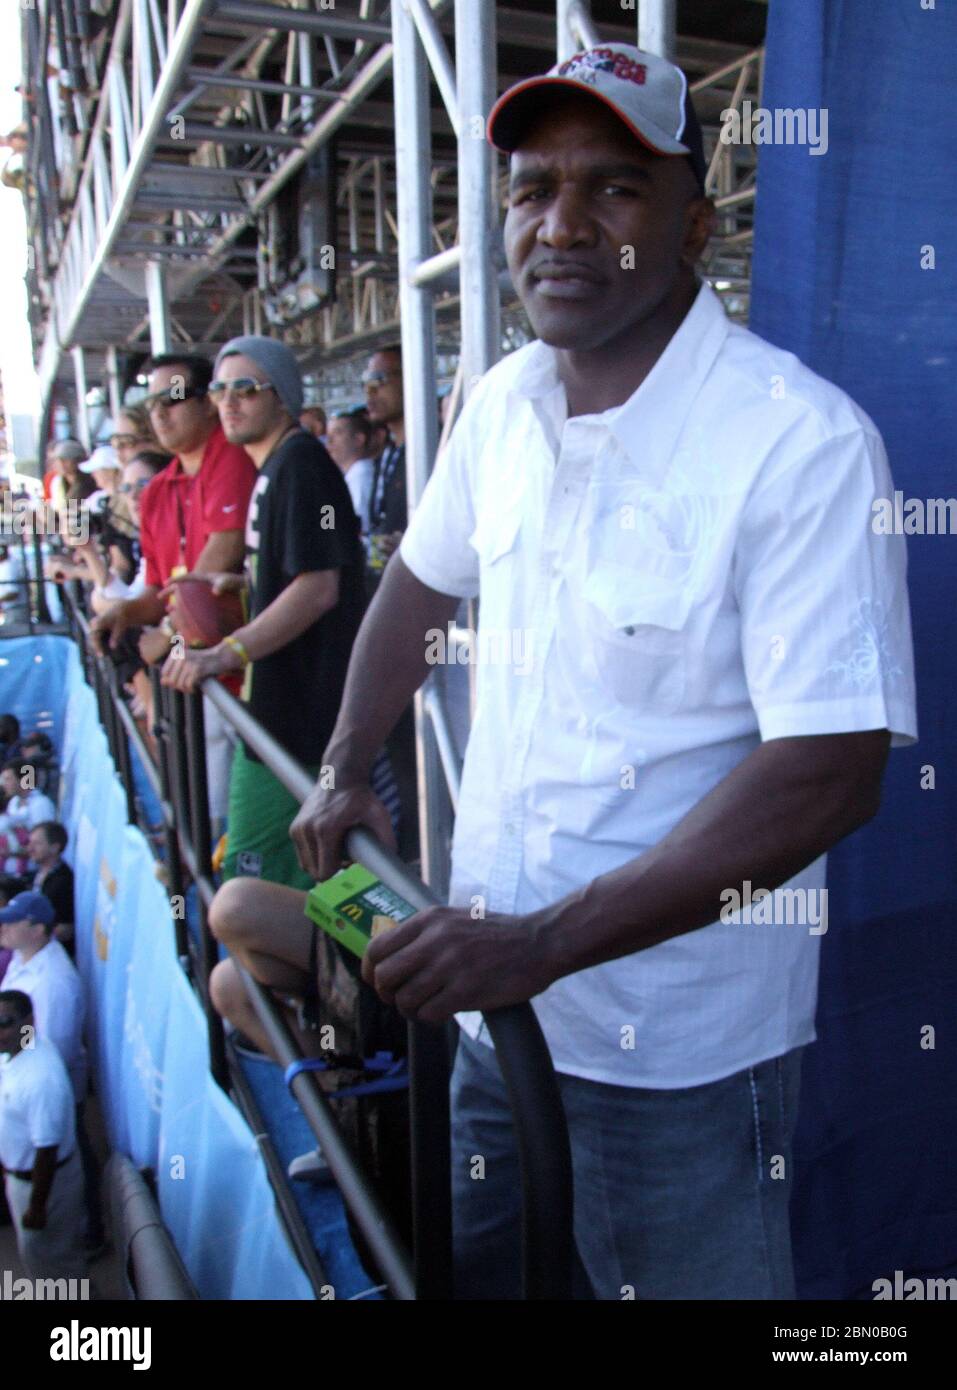 MIAMI - FEBRUARY 06: Evander Holyfield at the Direct TV Beach Bowl in South Beach for Superbowl week on February 6, 2010 in Miami, Florida. People: Evander Holyfield Credit: Storms Media Group/Alamy Live News Stock Photo